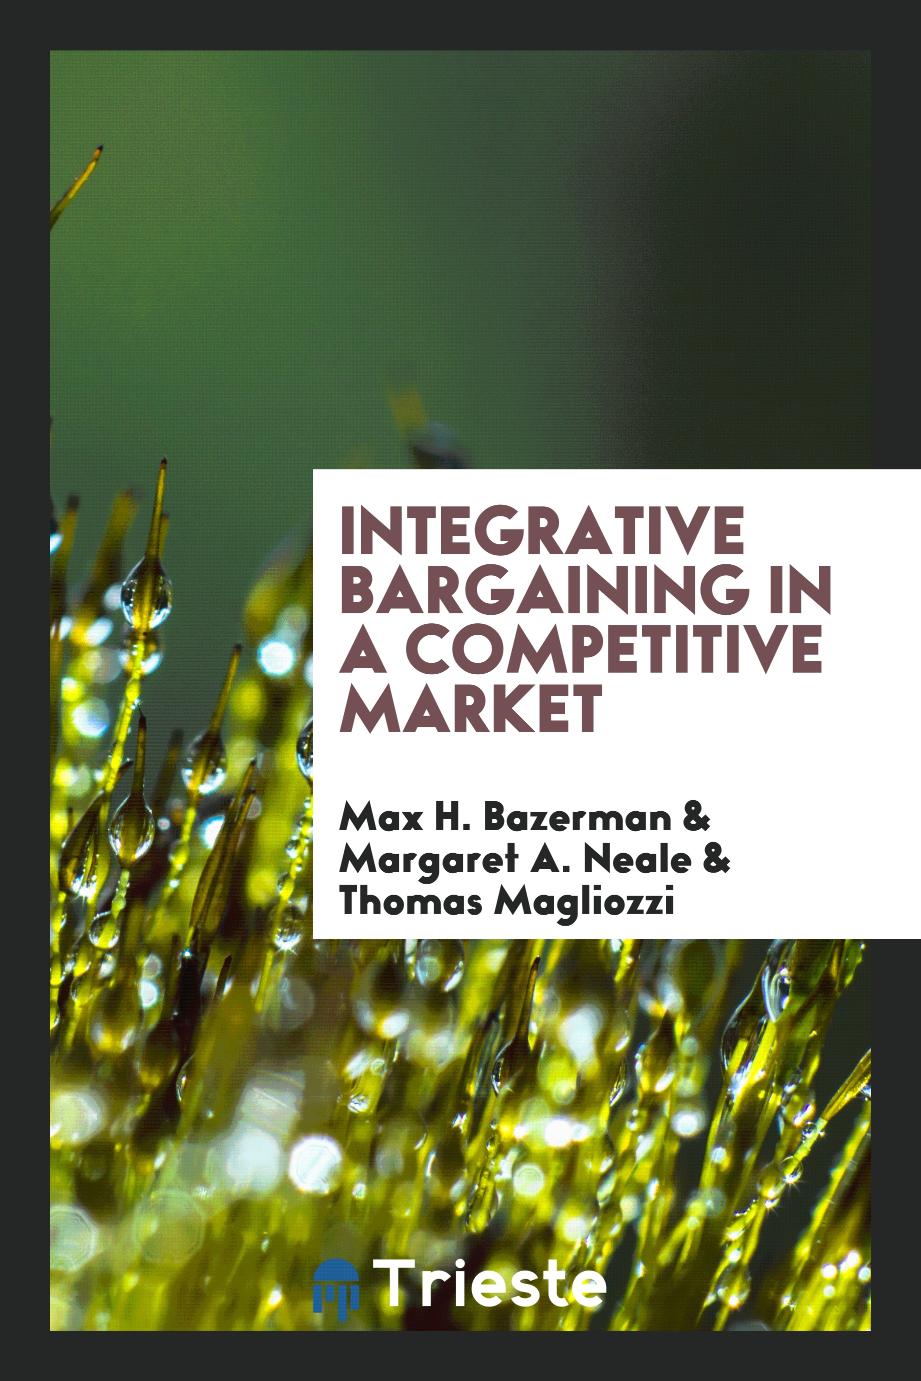 Integrative bargaining in a competitive market